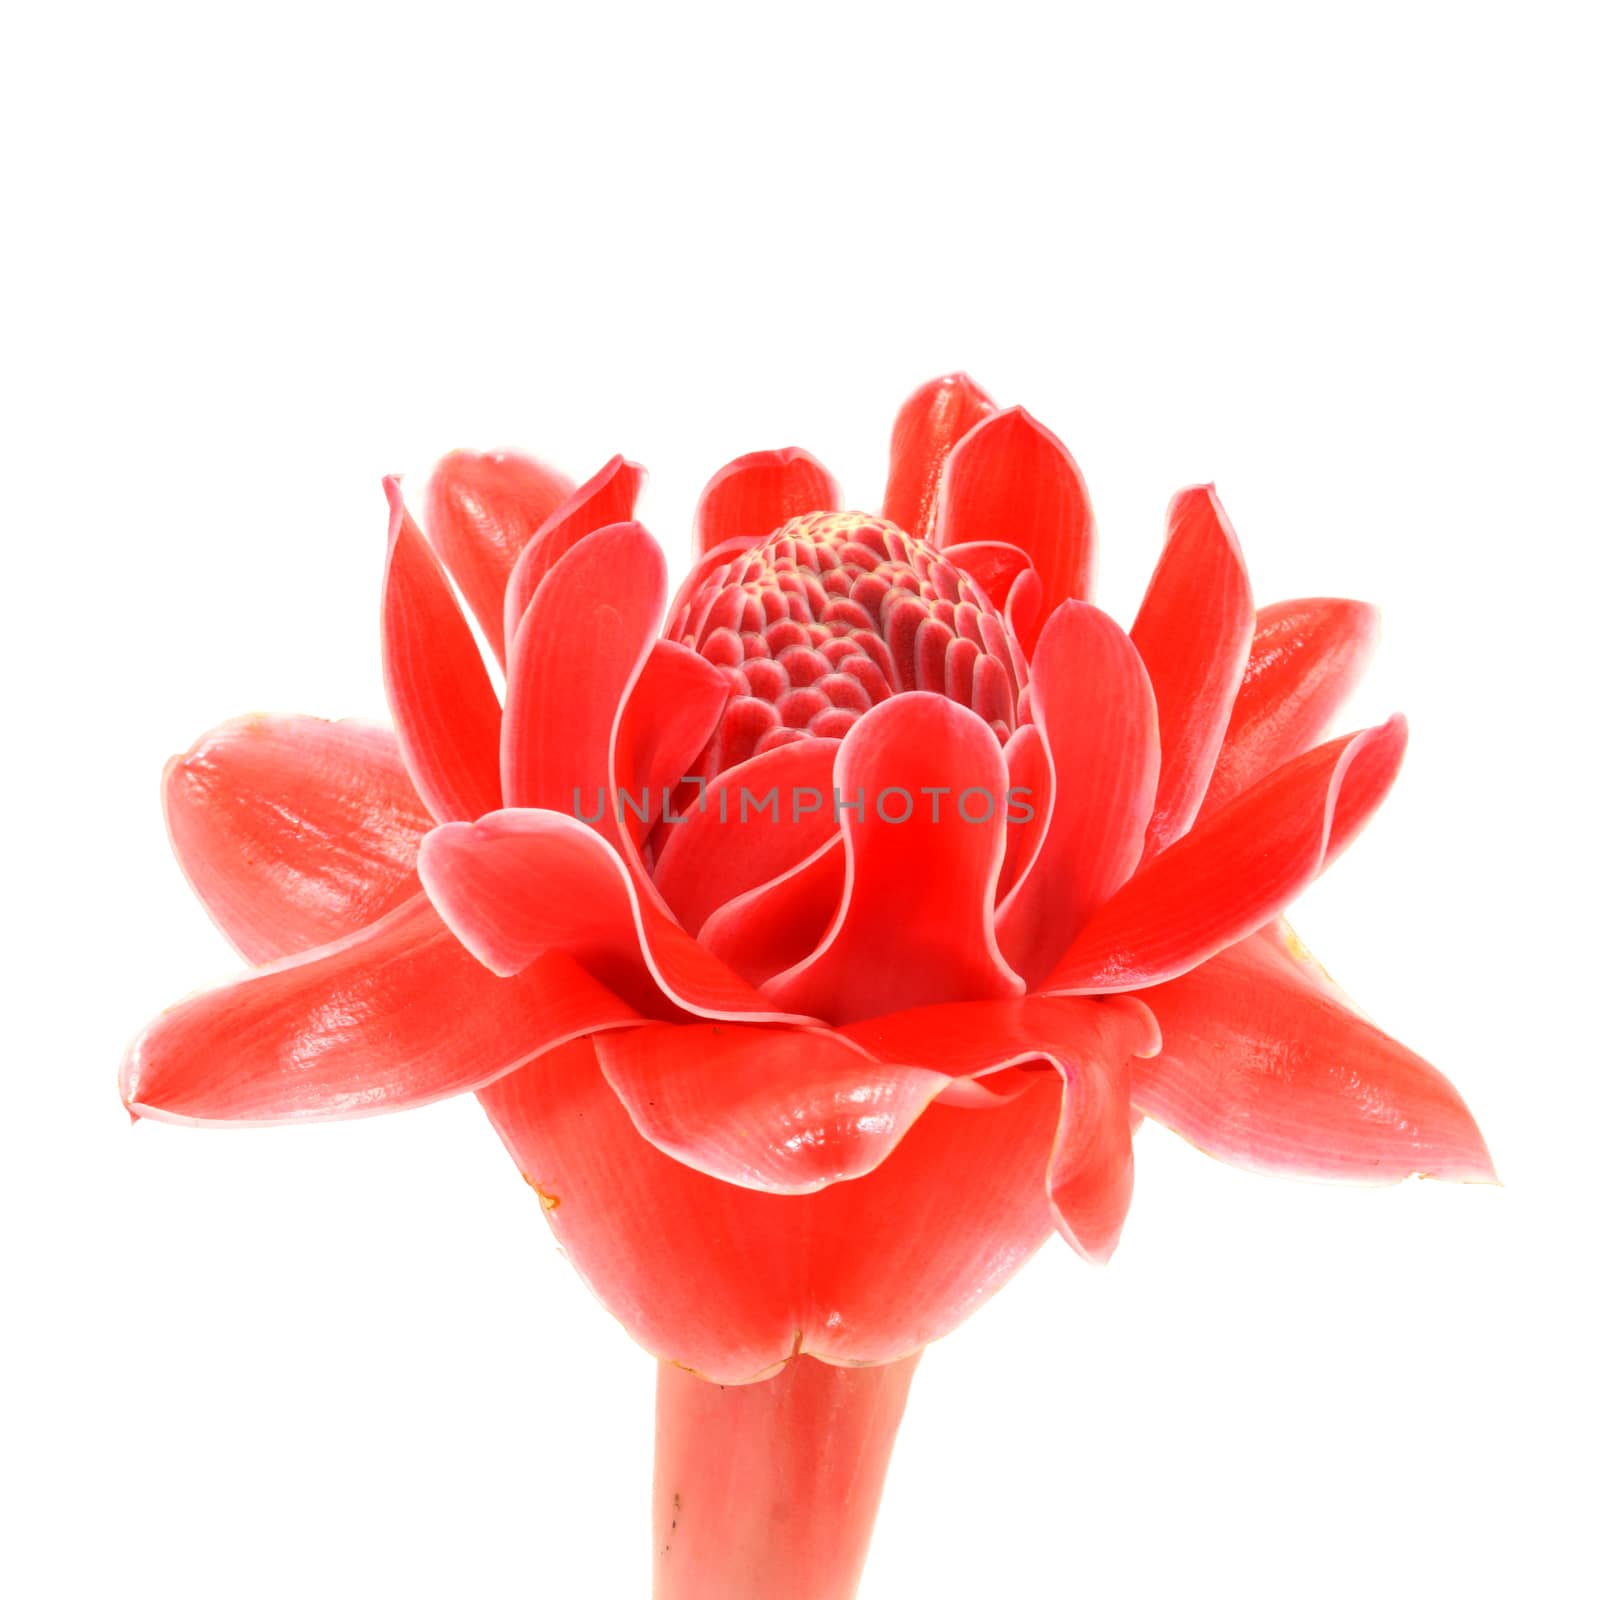 Tropical flower of red torch ginger. by Noppharat_th